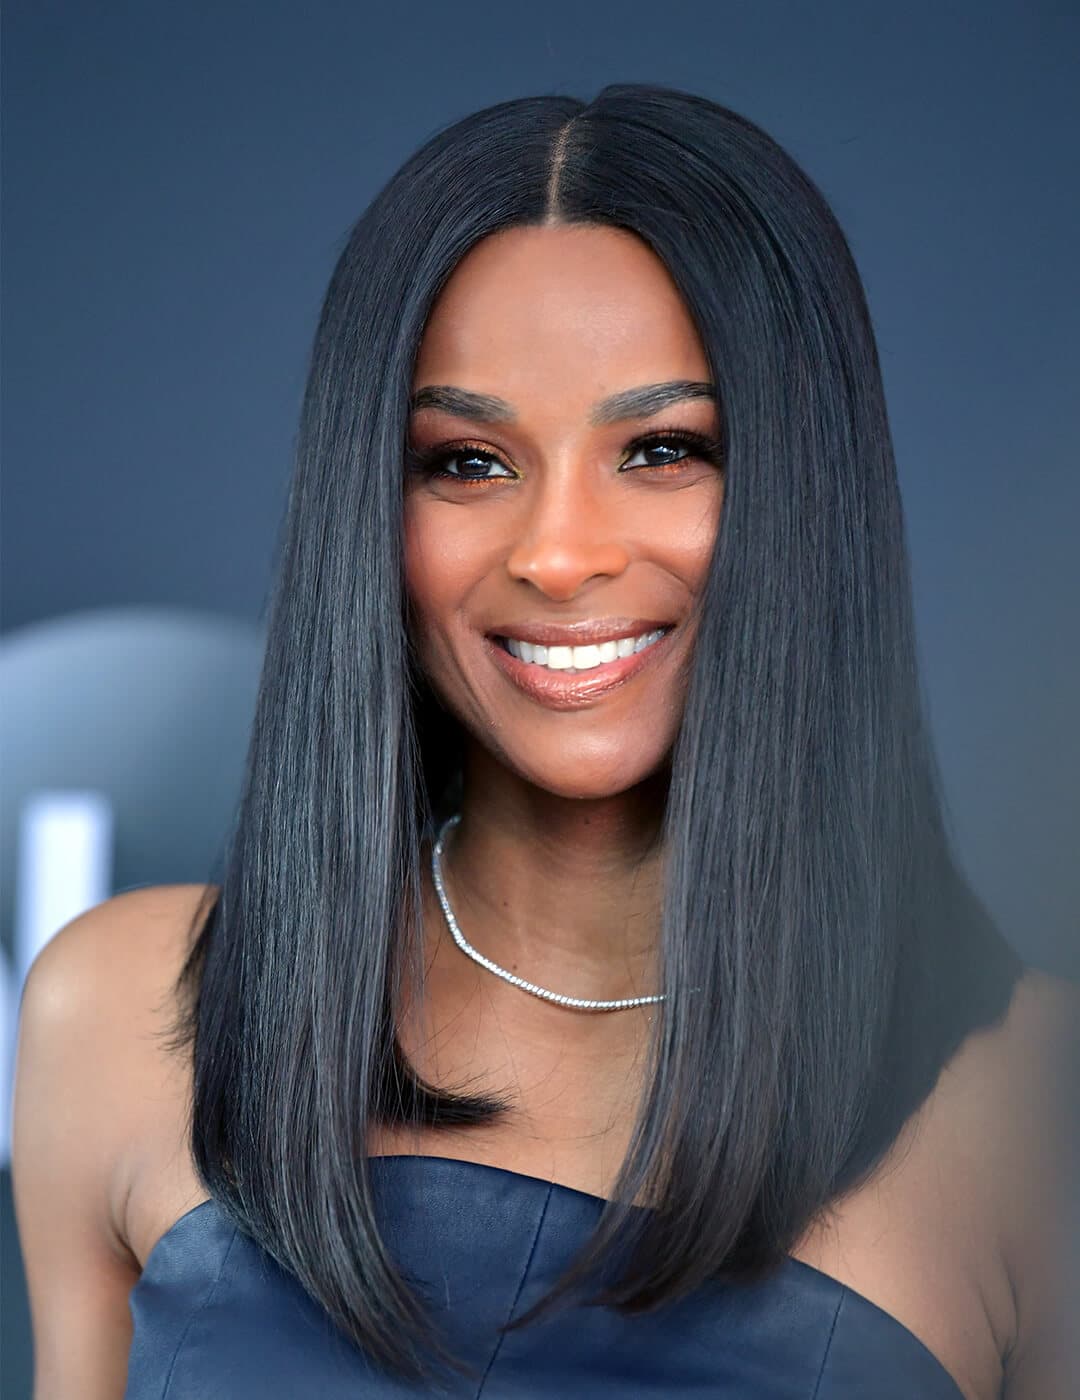 A photo of Ciara with a super long lob hairstyle wearing a white necklace